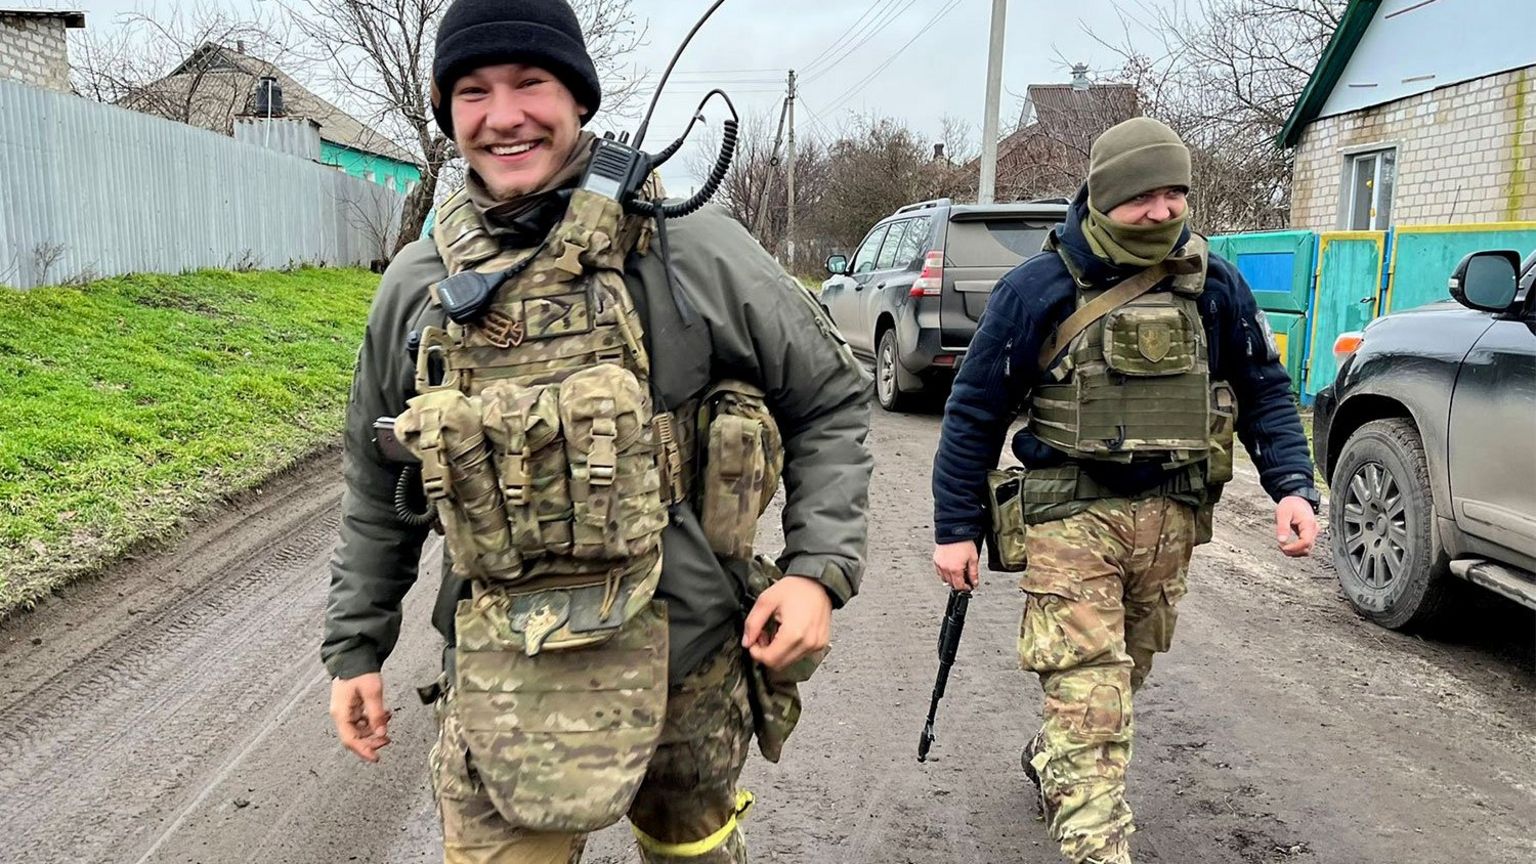 Eugene smiling in military gear with a comrade